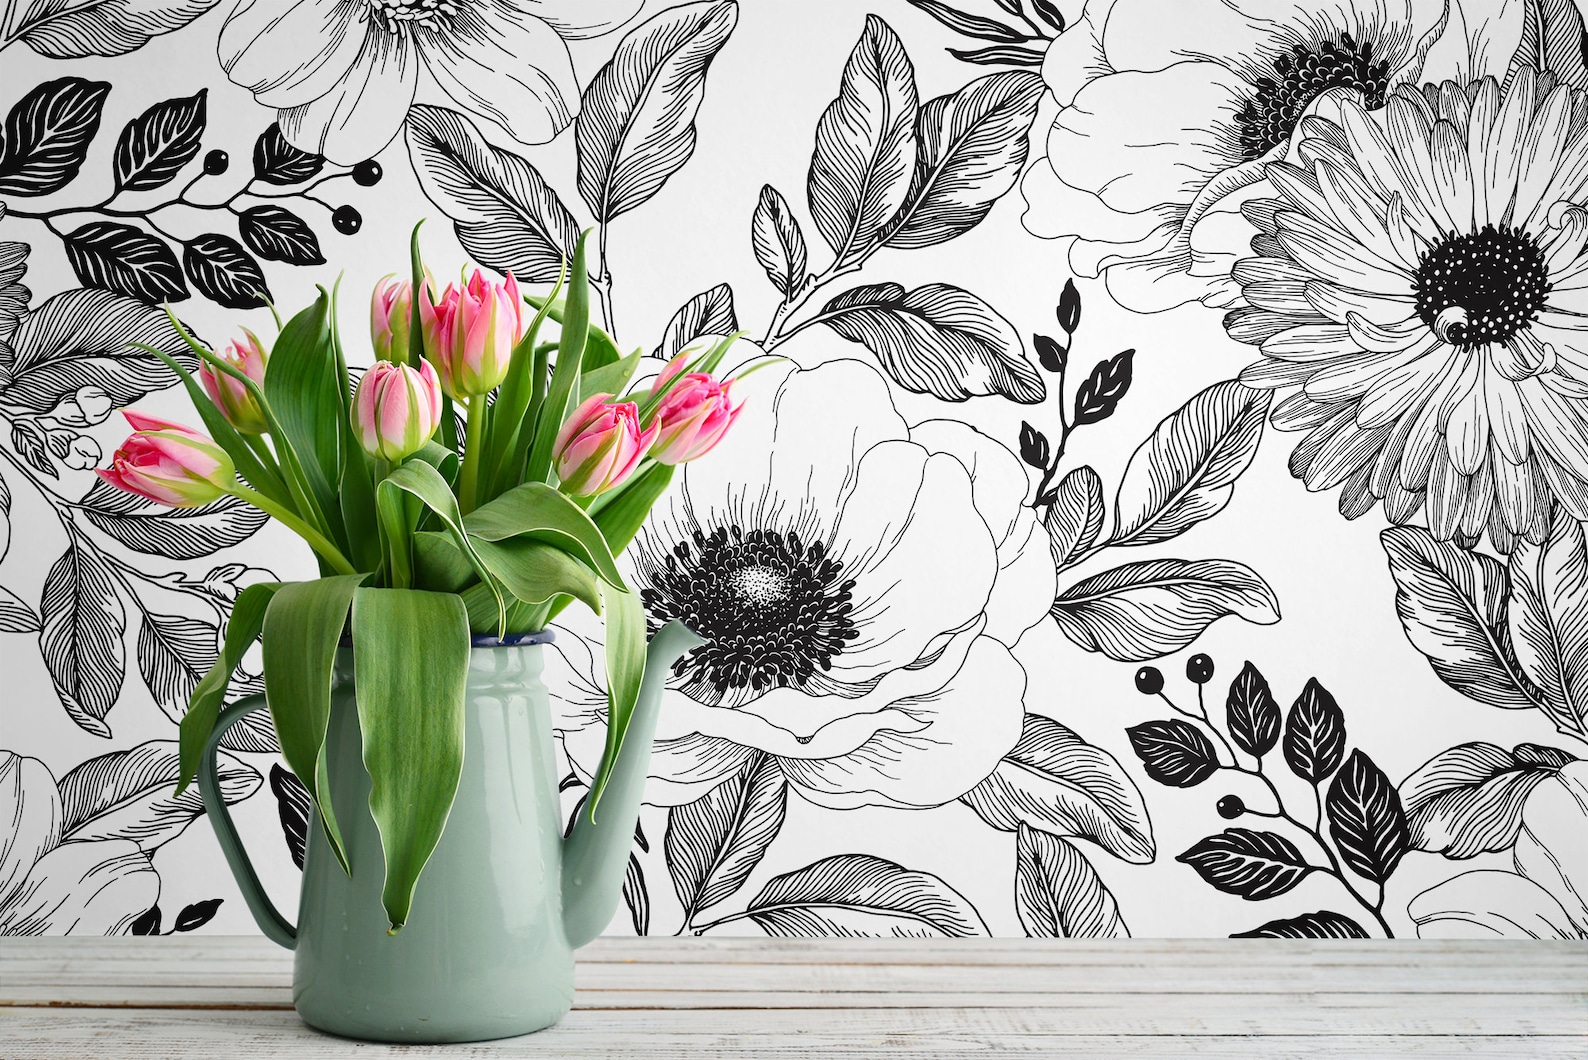 Black and White Floral Pattern Wallpaper Peel and Stick - Etsy